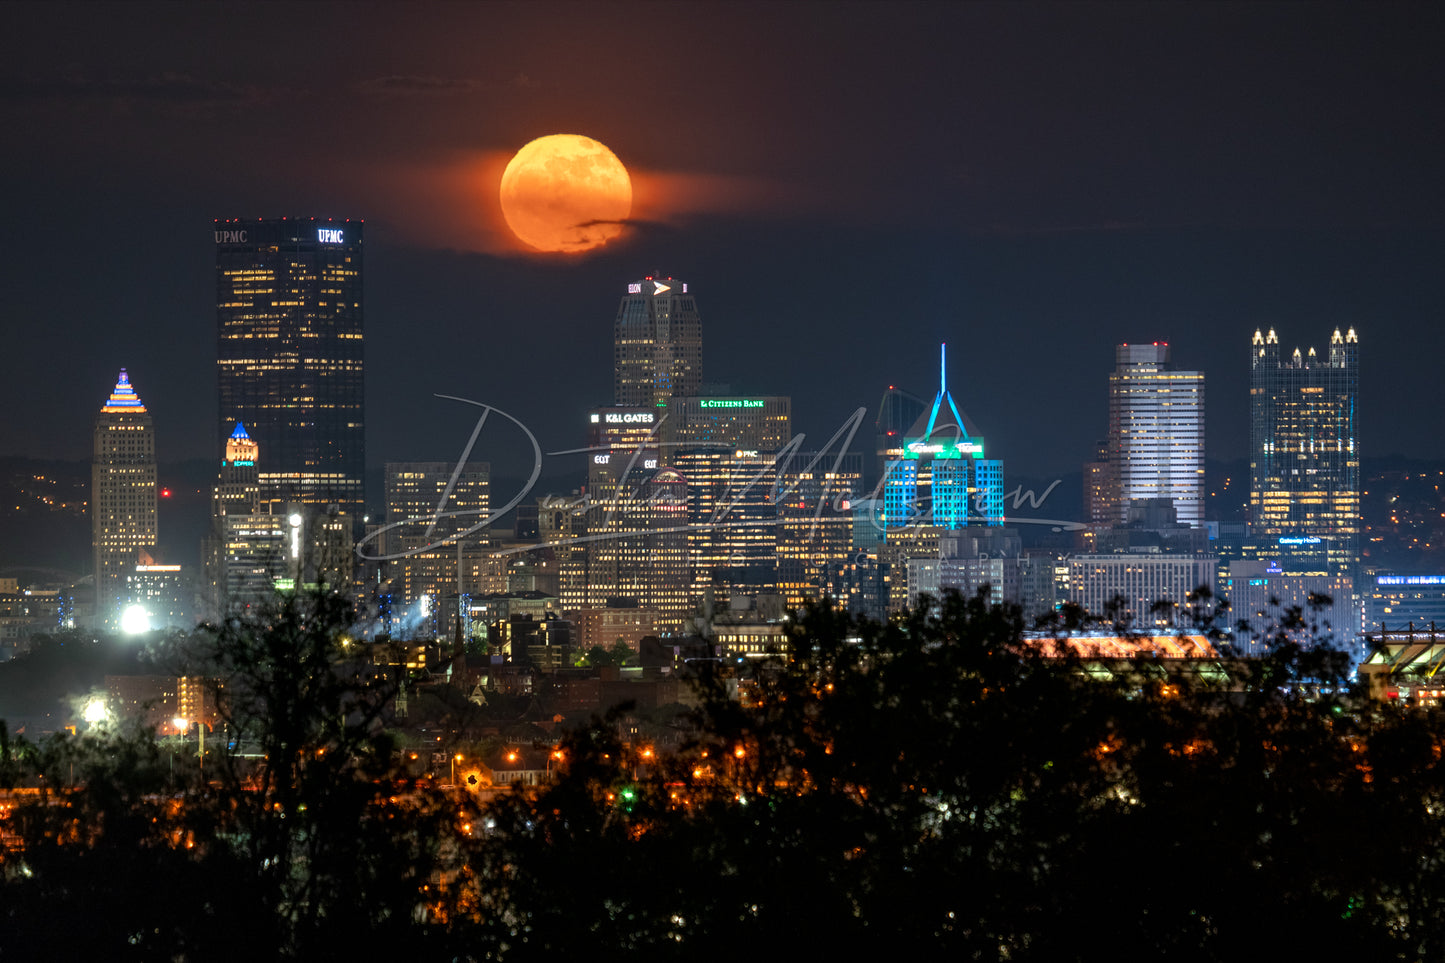 An Epic Moonrise Over the Pittsburgh Skyline